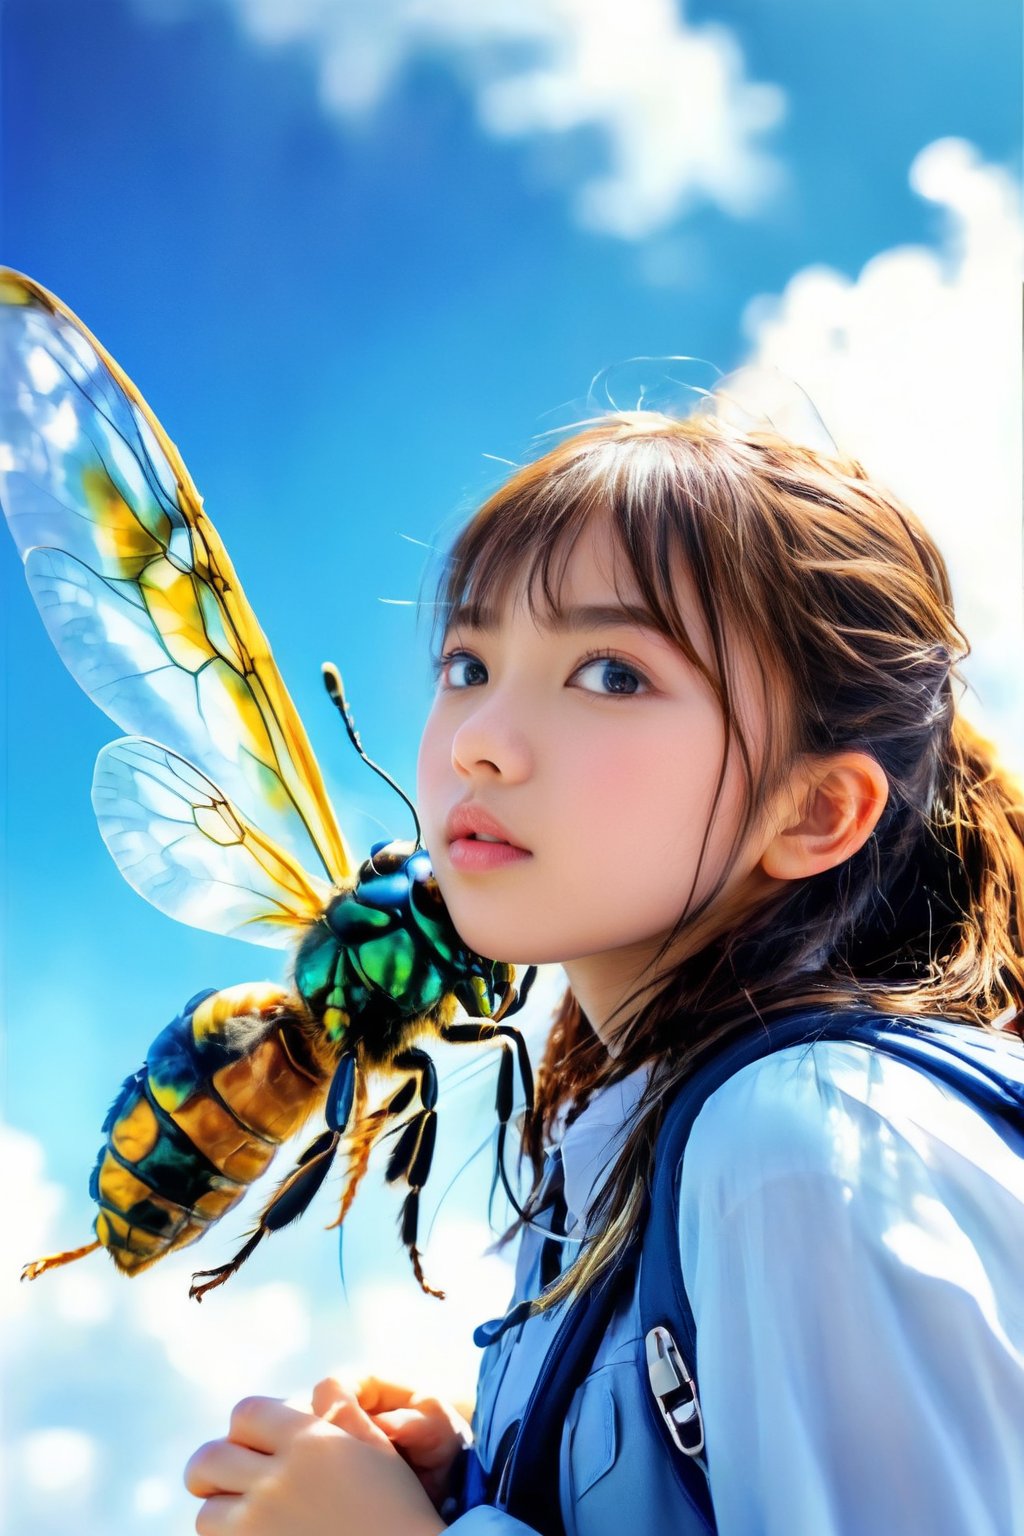 A close-up shot of a young girl perched on the back of a massive, iridescent hornet as it flies through a clear blue sky. The sun casts a warm glow, illuminating the delicate patterns on the insect's body. The girl holds onto the hornet's thorax with one hand and grips her backpack with the other. Her school uniform is slightly ruffled from the wind, and a determined look is etched on her face. The composition is centered around the girl and the hornet, with the surrounding landscape blurred to emphasize their unique relationship.